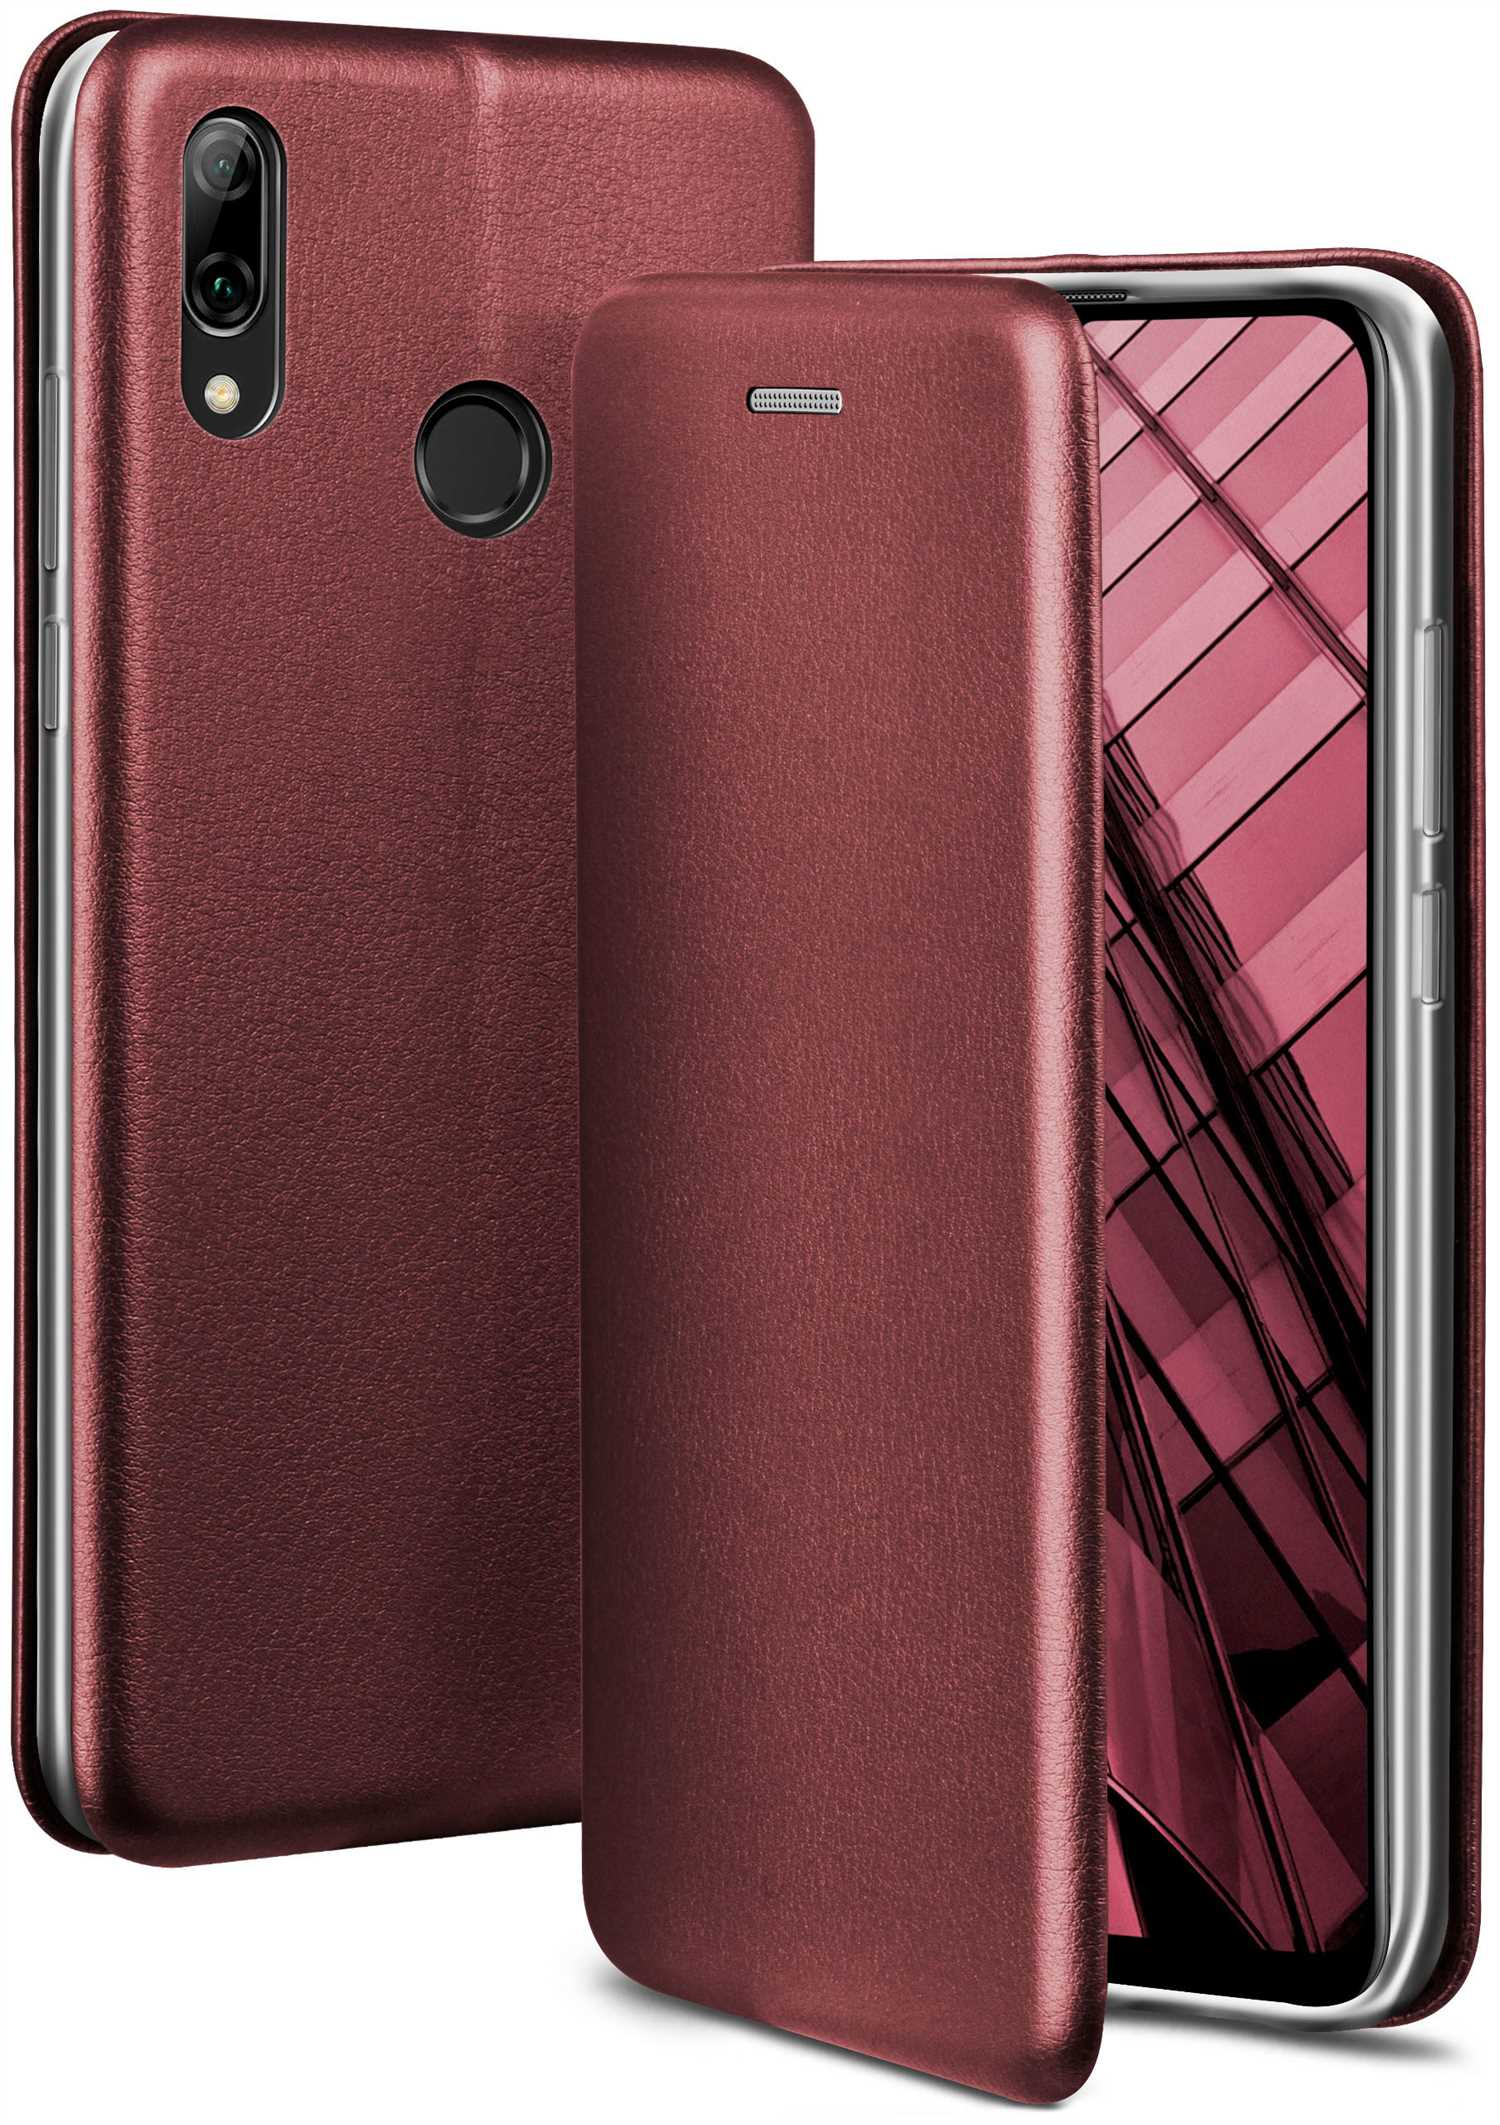 Flip Business Cover, smart - P 2019, ONEFLOW Burgund Case, Huawei, Red